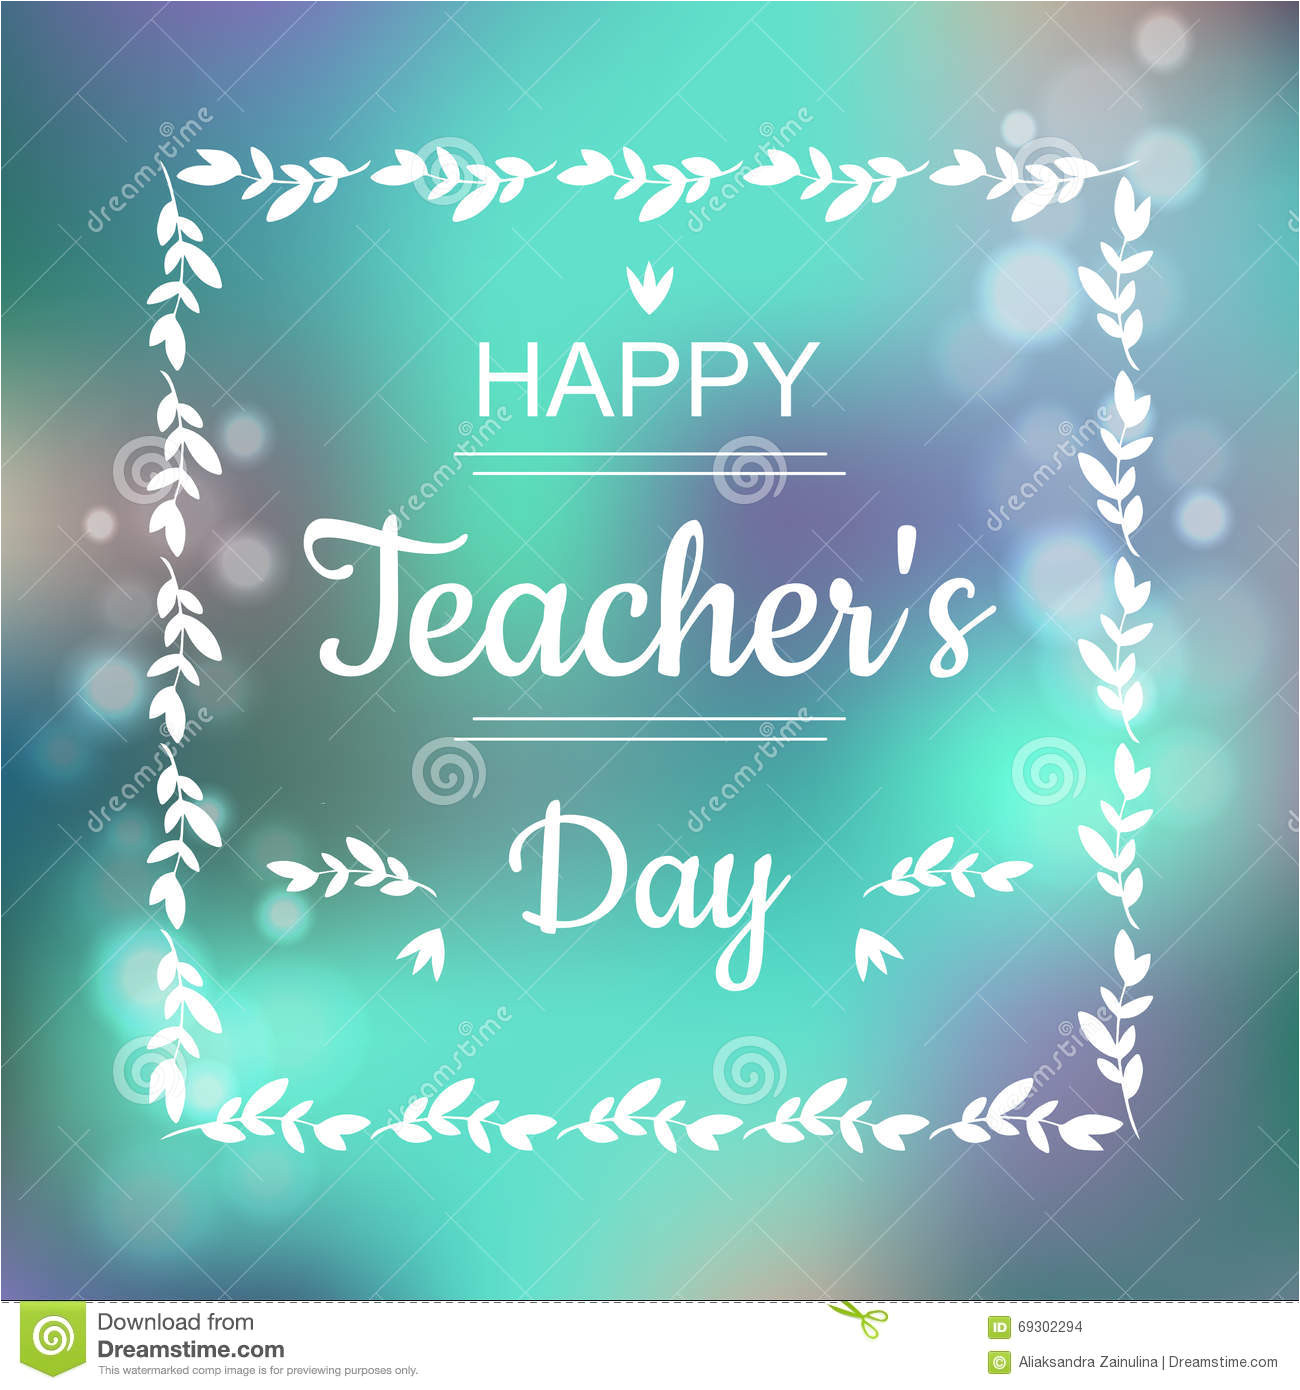 greeting card happy teachers day abstract background text square frame vector format illustration 69302294 jpg